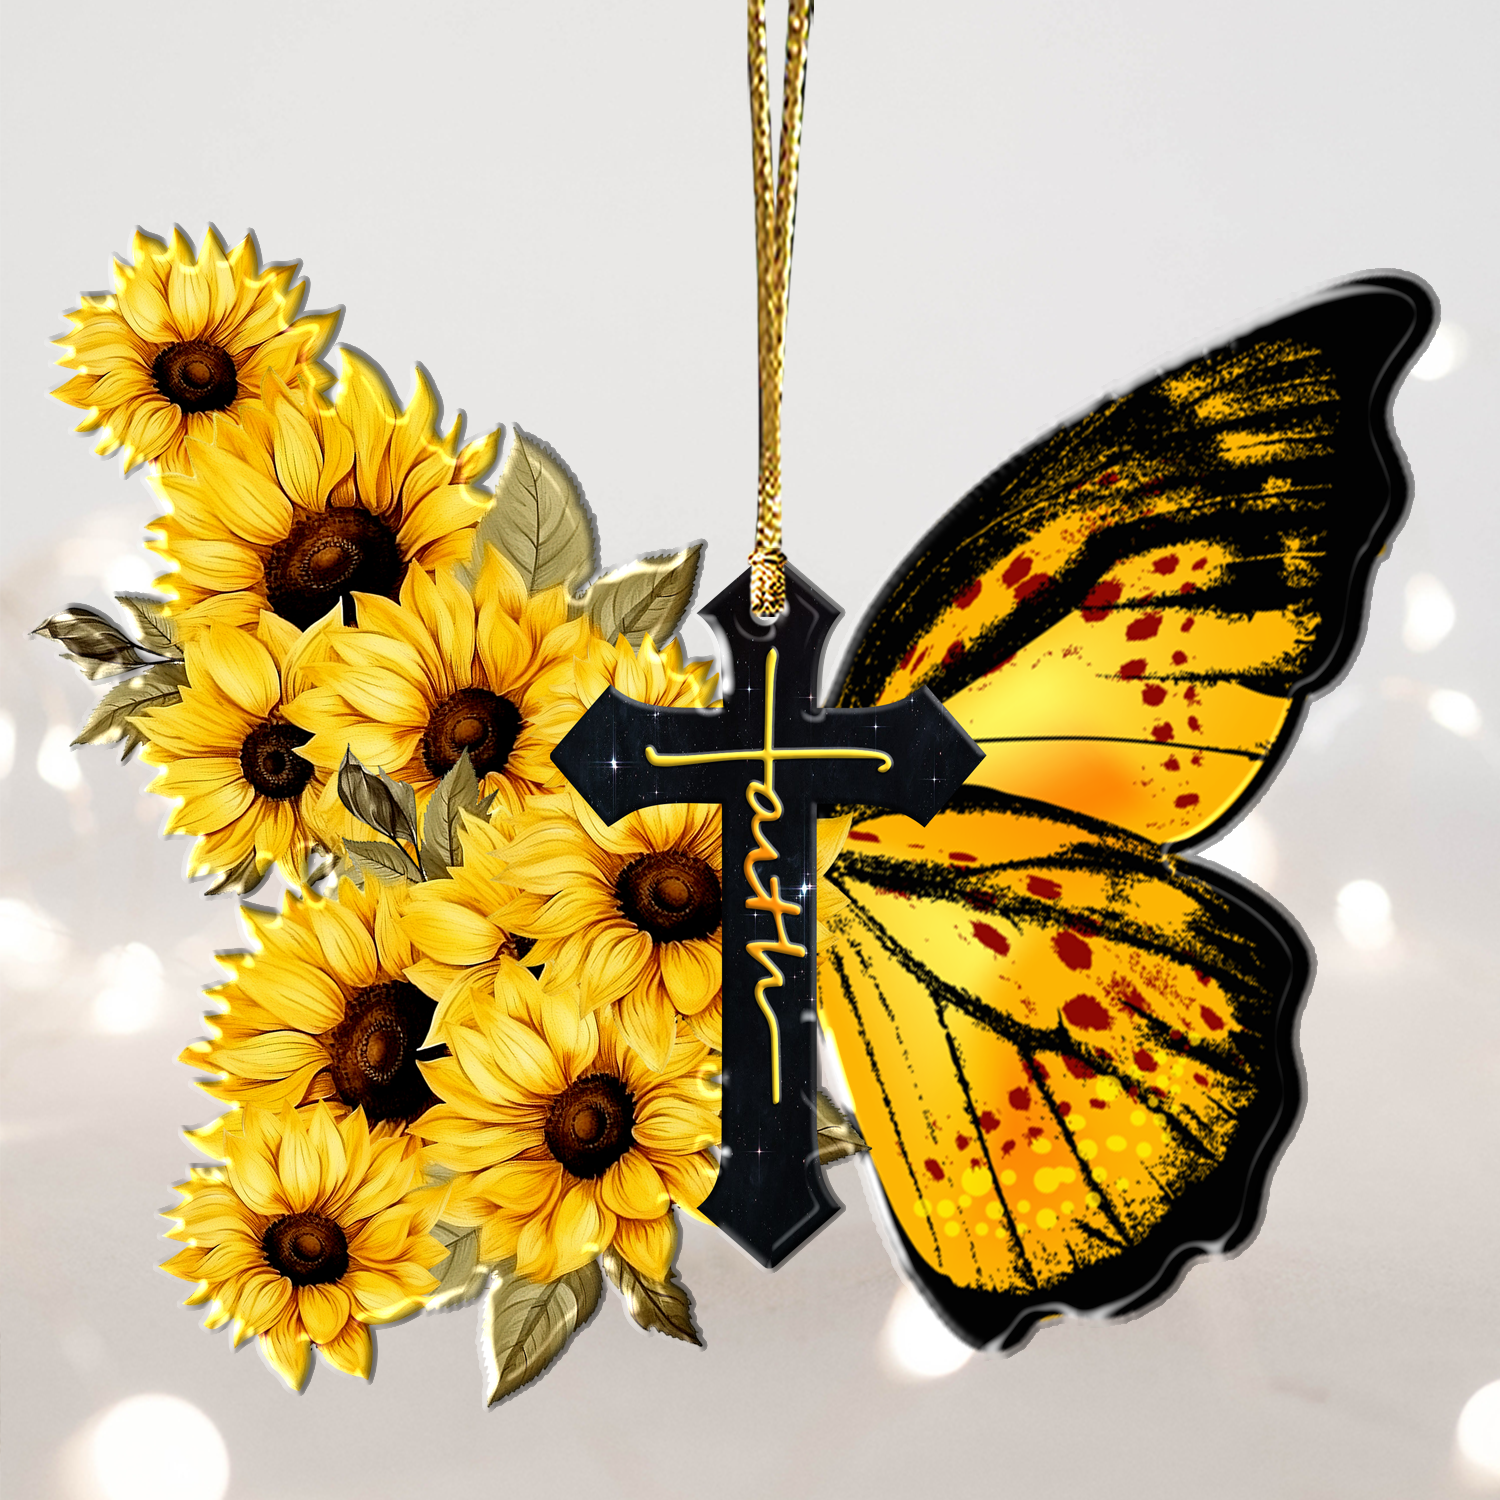 Butterfly Sunflower Cross Christian Gifts For Women, Birthday Gifts For Women, Ornament Gift, Christmas Ornament Car Hanging